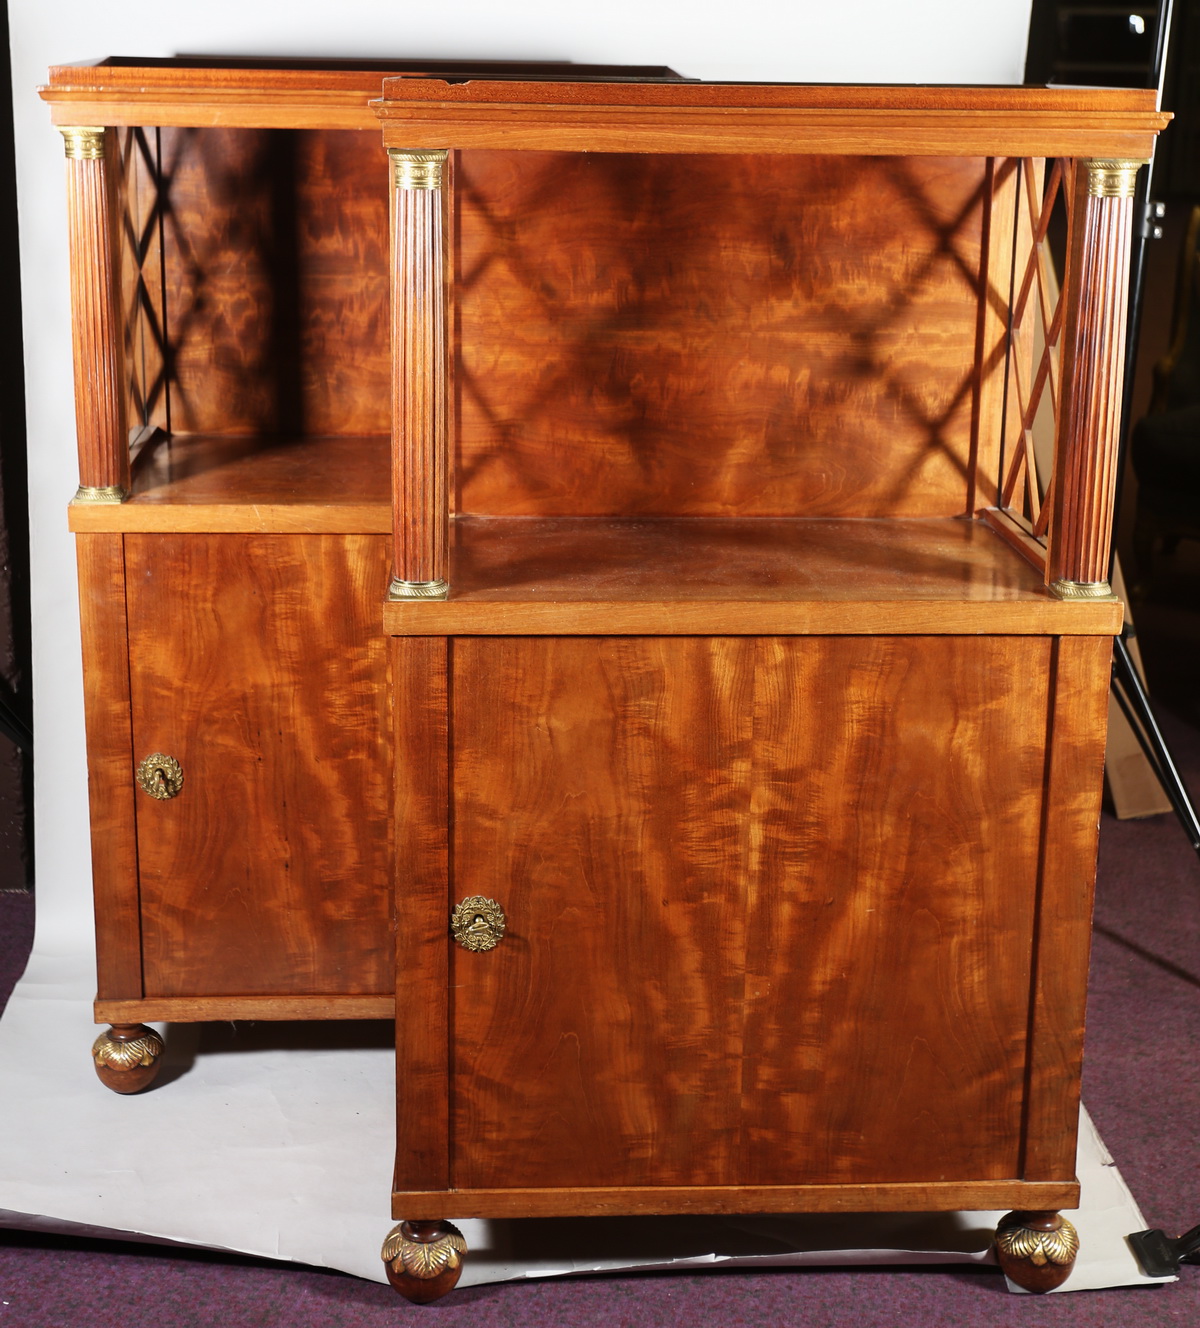 Pair of small Empire style sideboards 